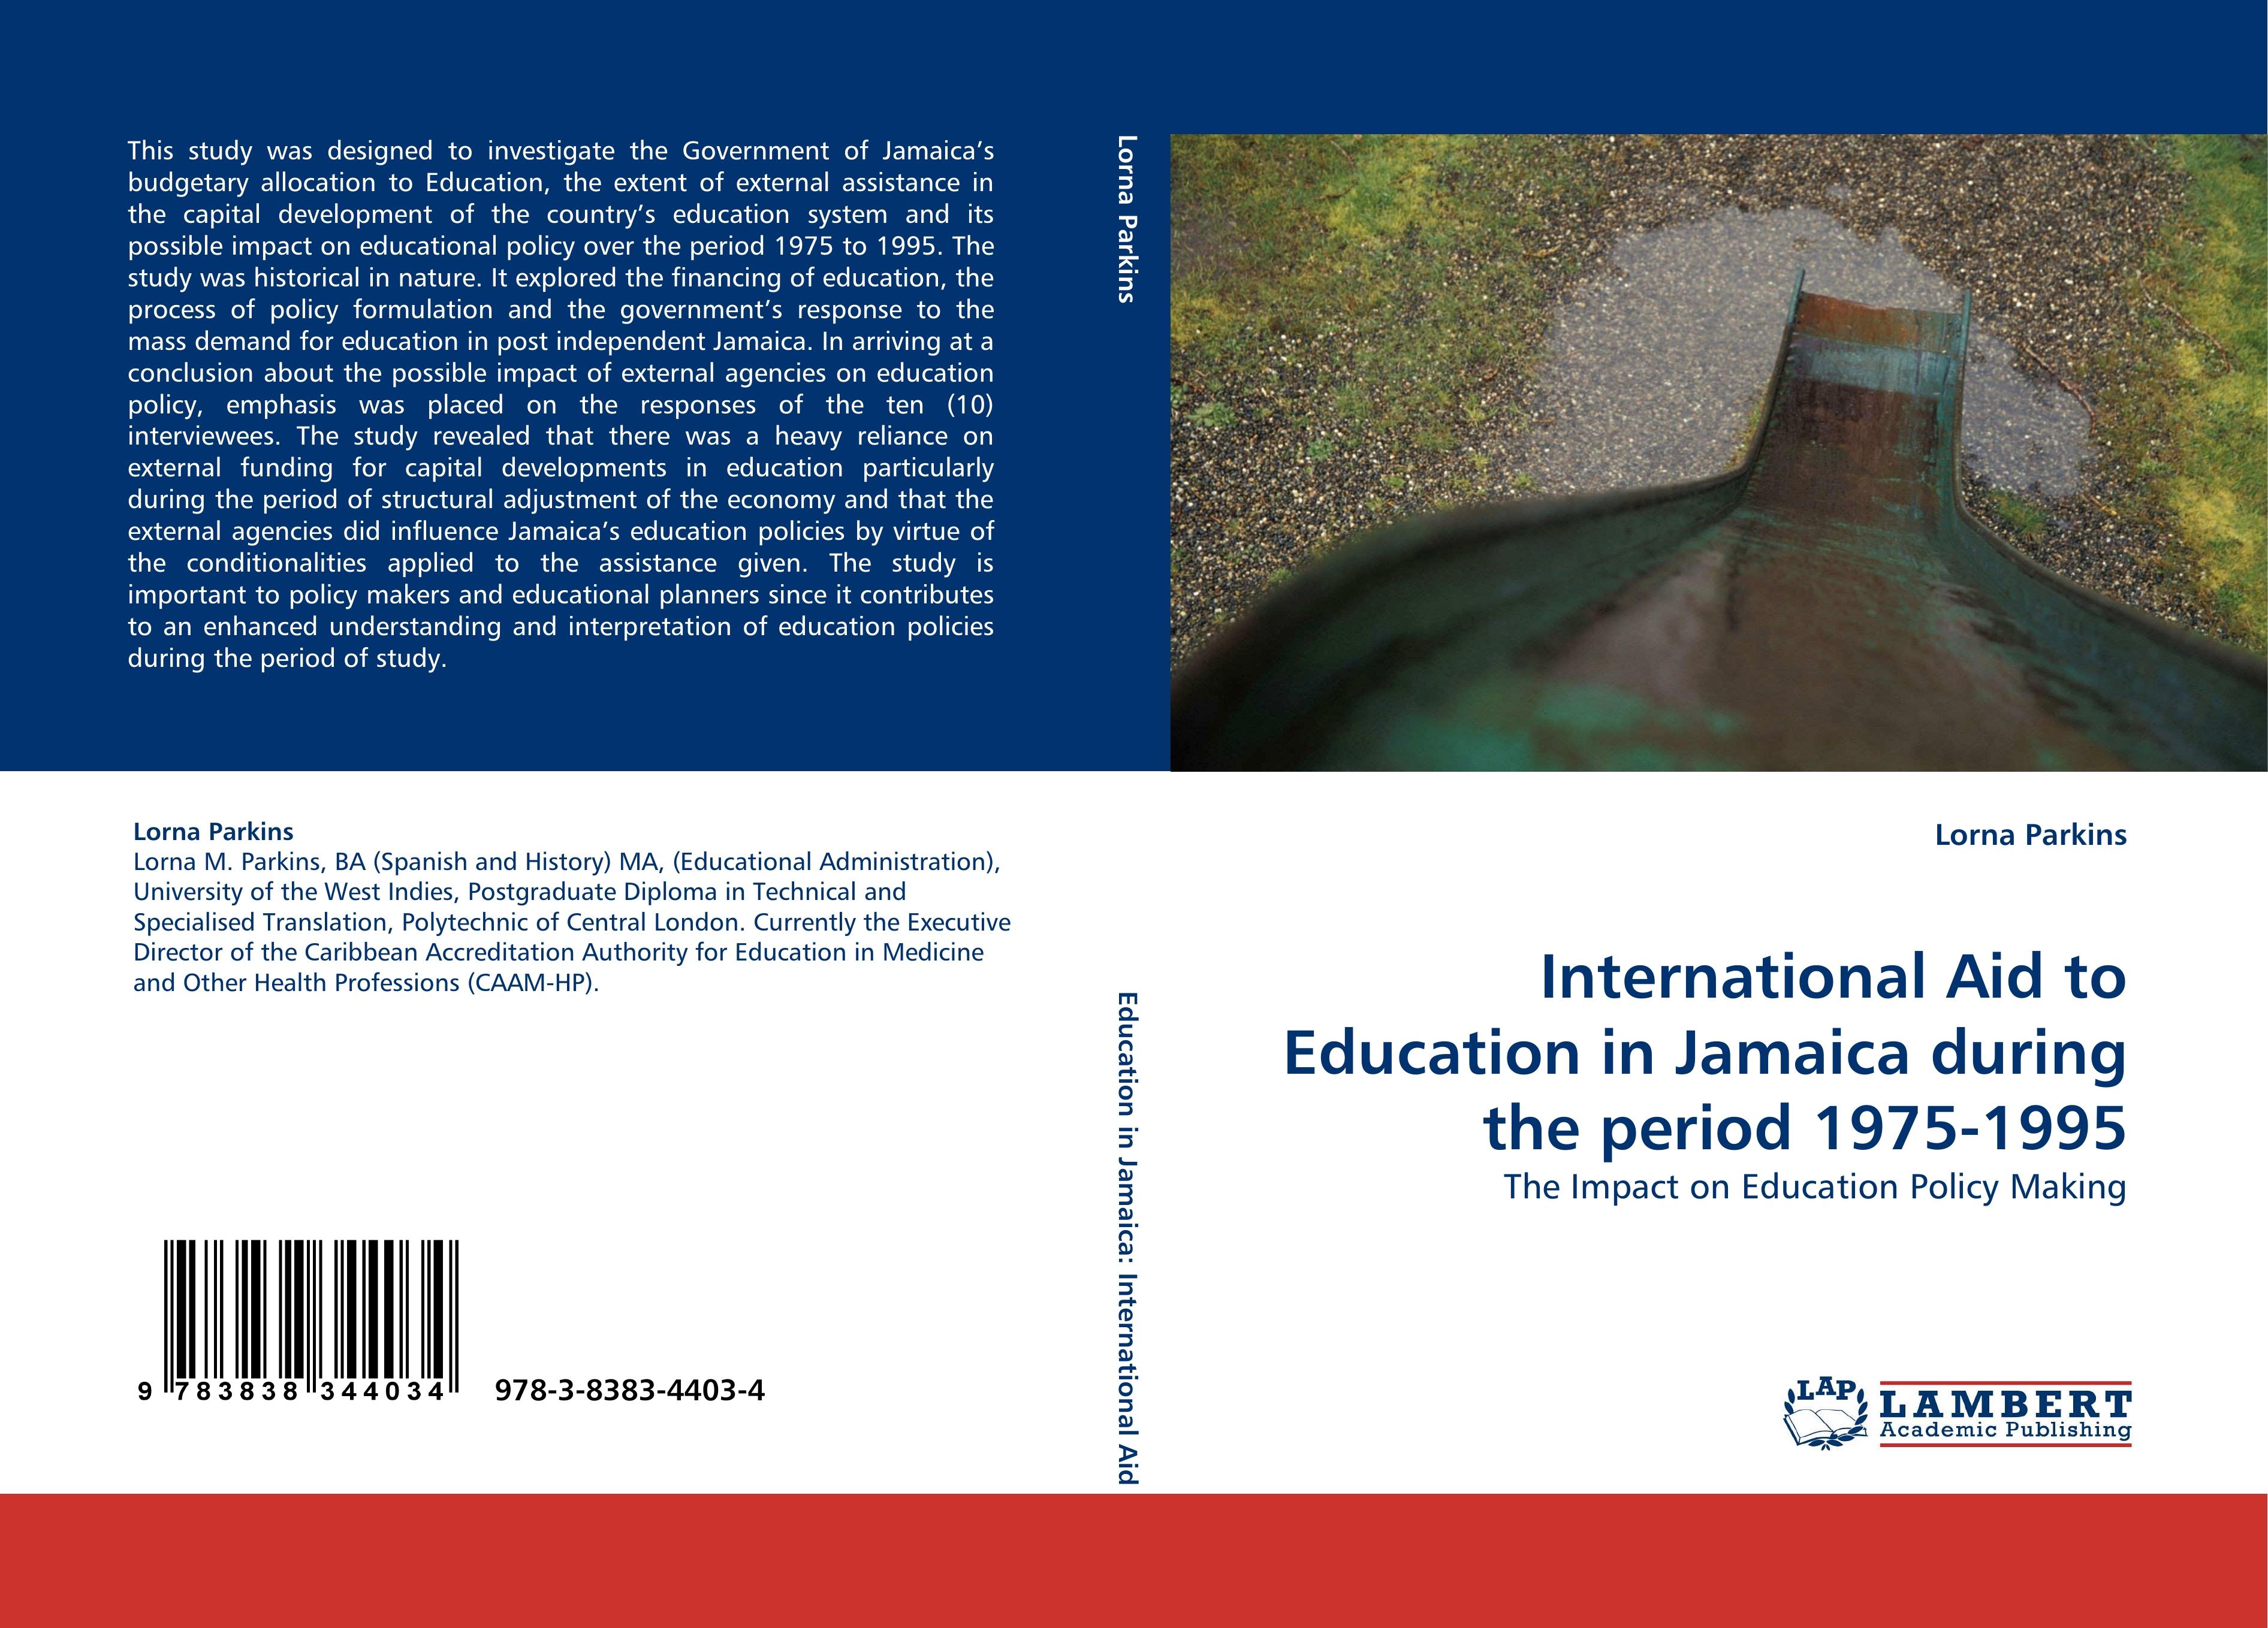 International Aid to Education in Jamaica during the period 1975-1995 / The Impact on Education Policy Making / Lorna Parkins / Taschenbuch / Paperback / 172 S. / Englisch / 2010 / EAN 9783838344034 - Parkins, Lorna